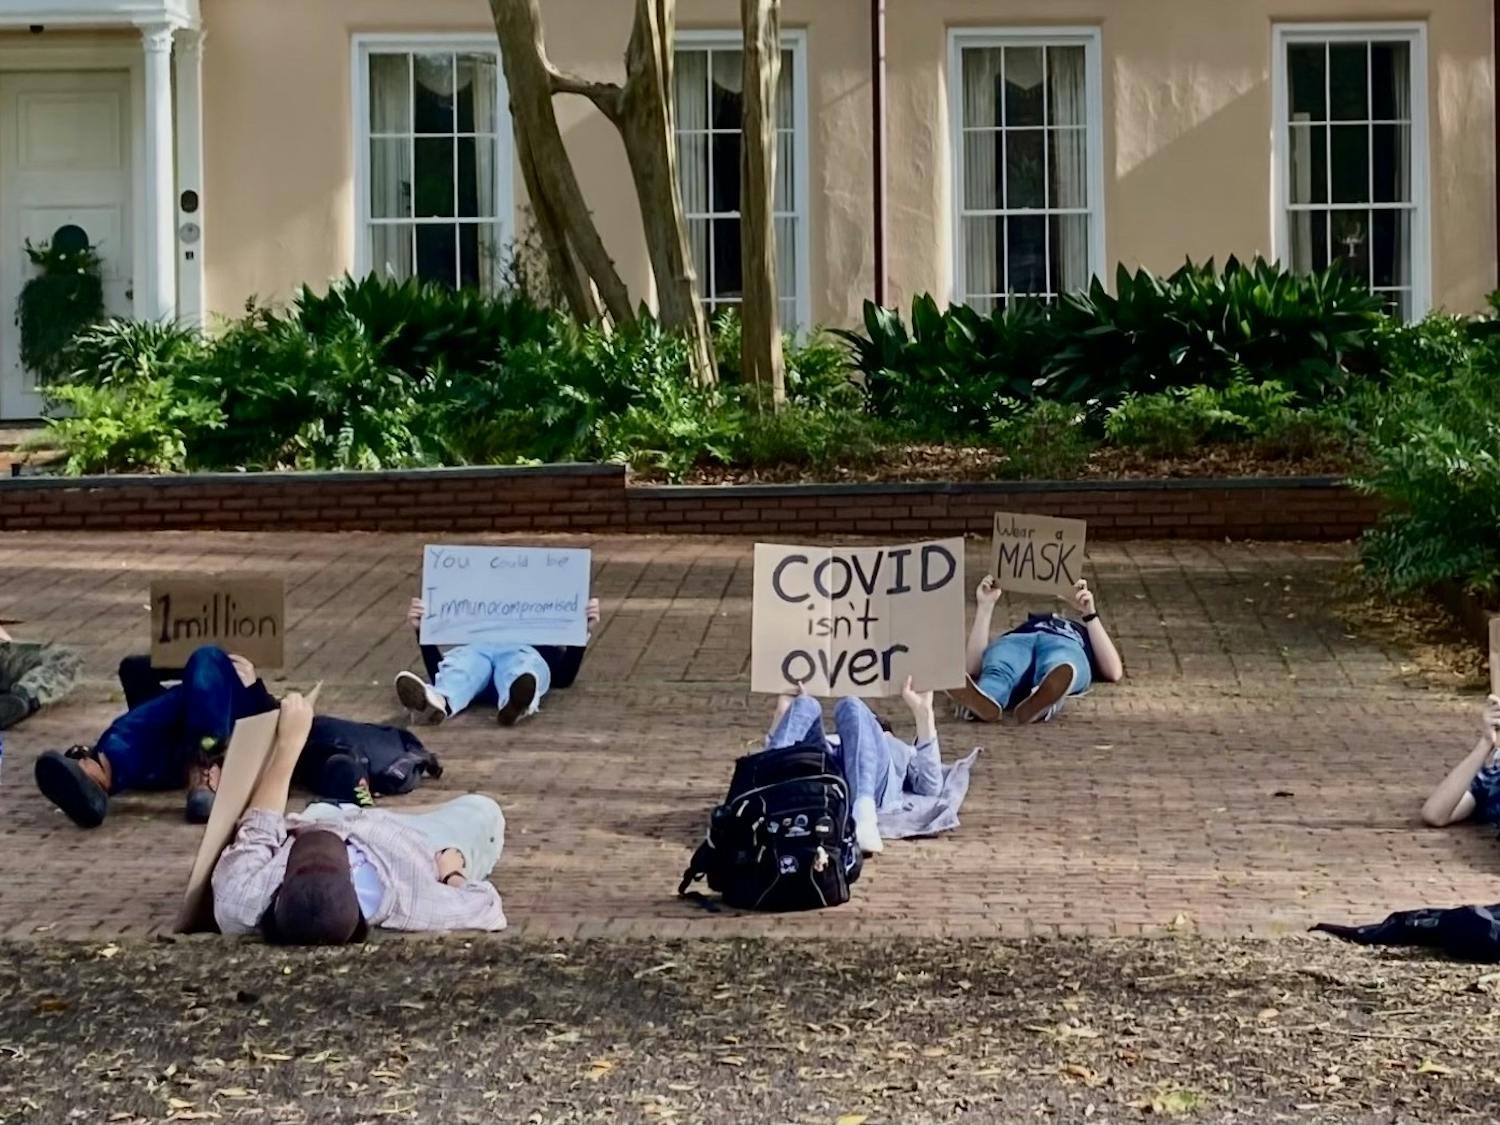 Protestors lay with signs on the Horseshoe at the University of South Carolina on Thursday, March 31, 2022. The protest was held to speak out against the recent removal of UofSC's mask mandate.